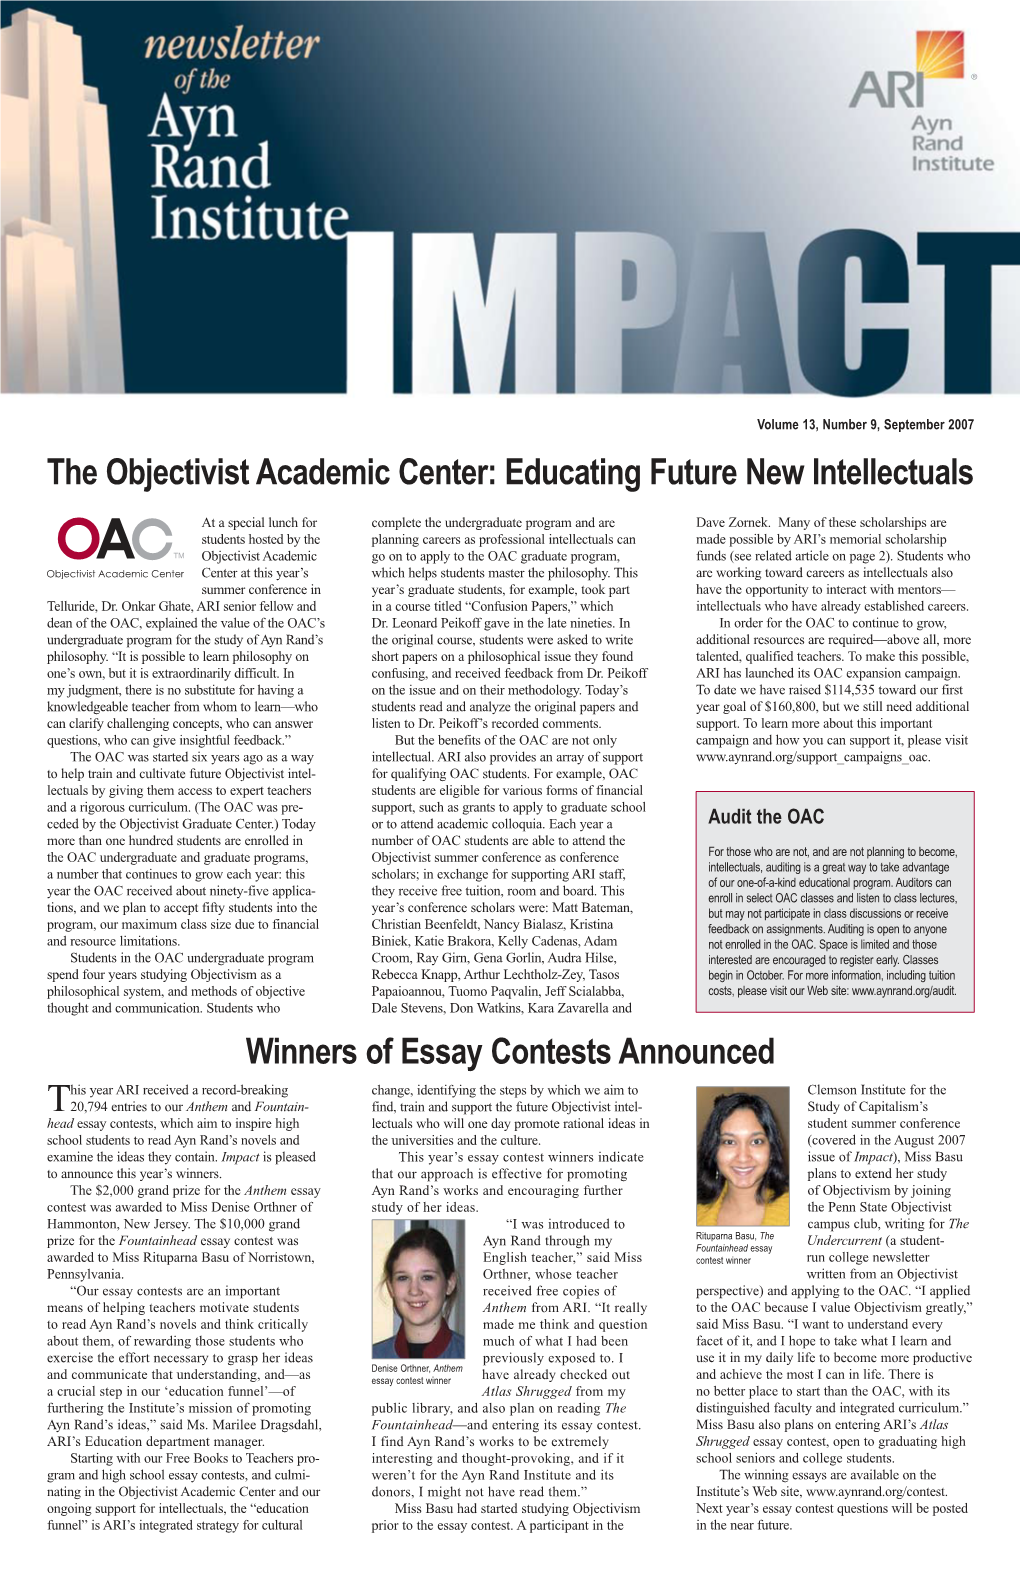 The Objectivist Academic Center: Educating Future New Intellectuals Winners of Essay Contests Announced